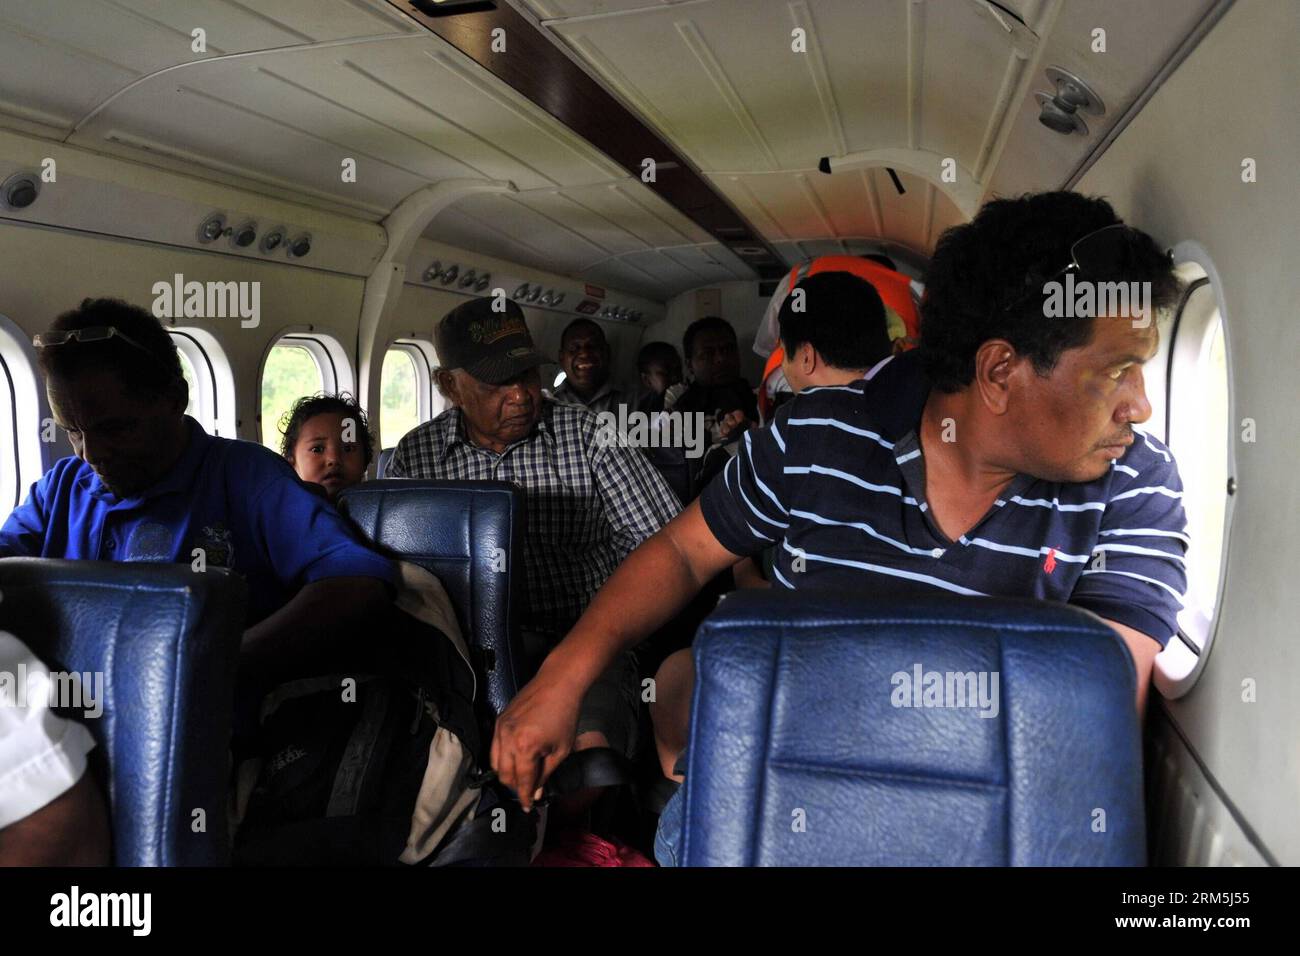 Bildnummer: 60668792  Datum: 29.10.2013  Copyright: imago/Xinhua Passengers are on board of a Twin Otter lightplane which has served 30 years in Solomon Islands, Oct. 29, 2013. The Solomon Airlines owns a history of more than 50 years. The DHC 8-102 , Twin Otter and Islander are three kinds of vintage lightplanes serving for national flights which can respectively carry 36, 16 and 9 passengers. Most of these planes have served more than ten years or even dozens of years. (Xinhua/Gao Jianjun) SOLOMON ISLANDS-SOLOMON AIRLINES-VINTAGE LIGHTPLANES PUBLICATIONxNOTxINxCHN Gesellschaft x0x xsk 2013 q Stock Photo